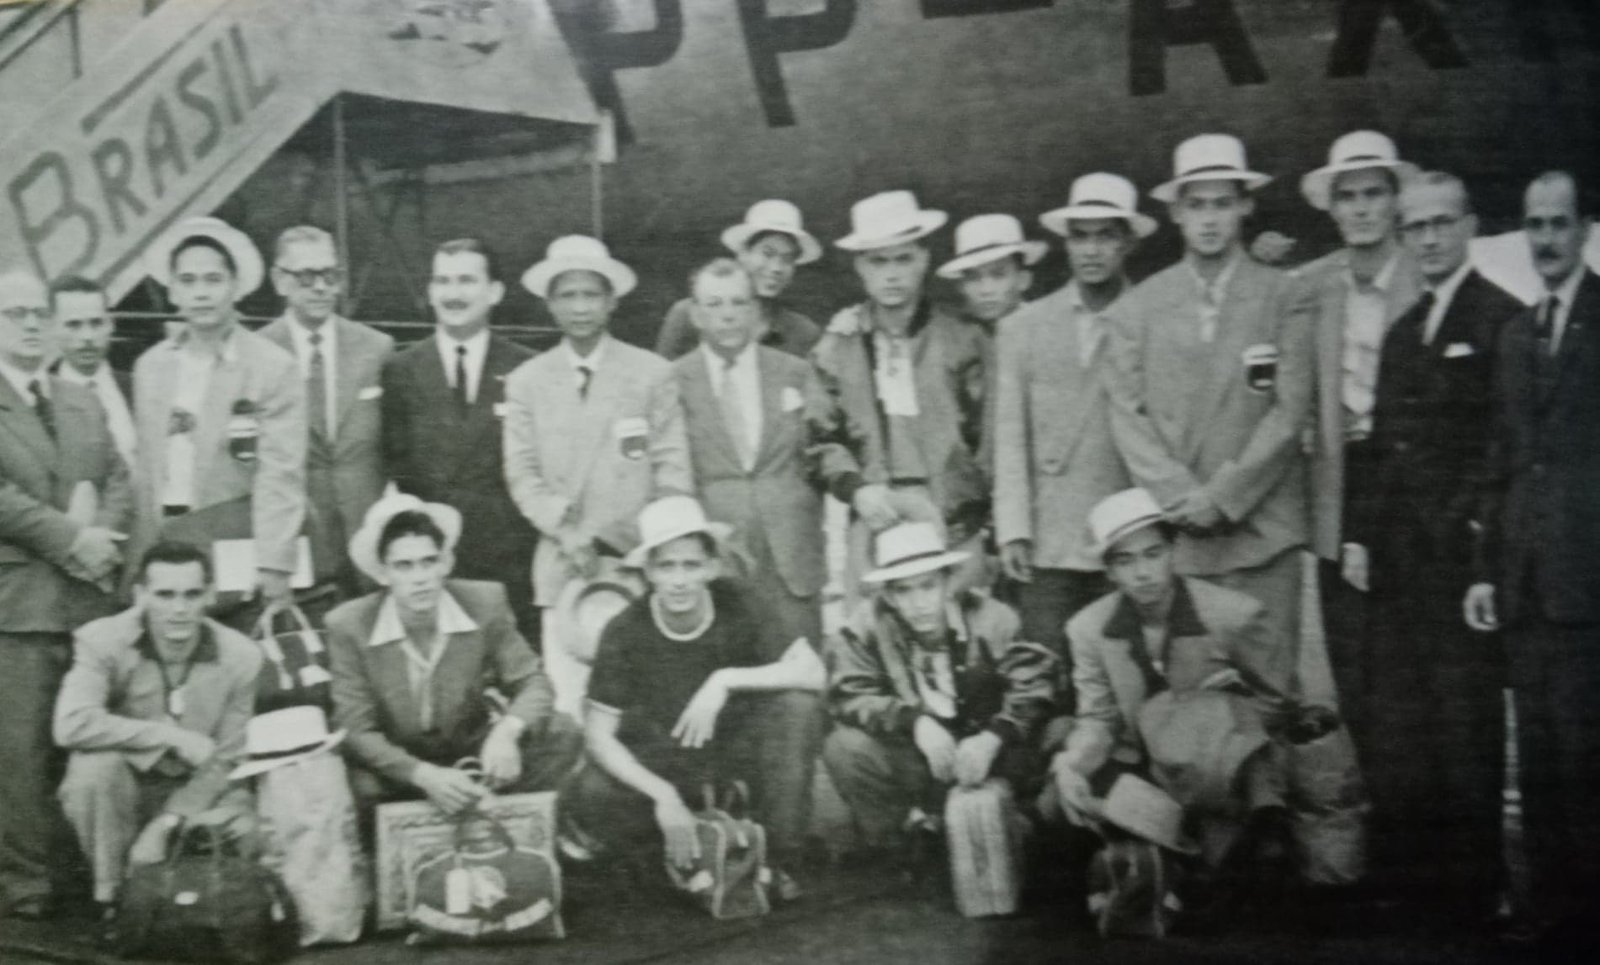 PH National Team that won the bronze in 1954 World Basketball in Rio de Janeiro. [Henry Liao photo]